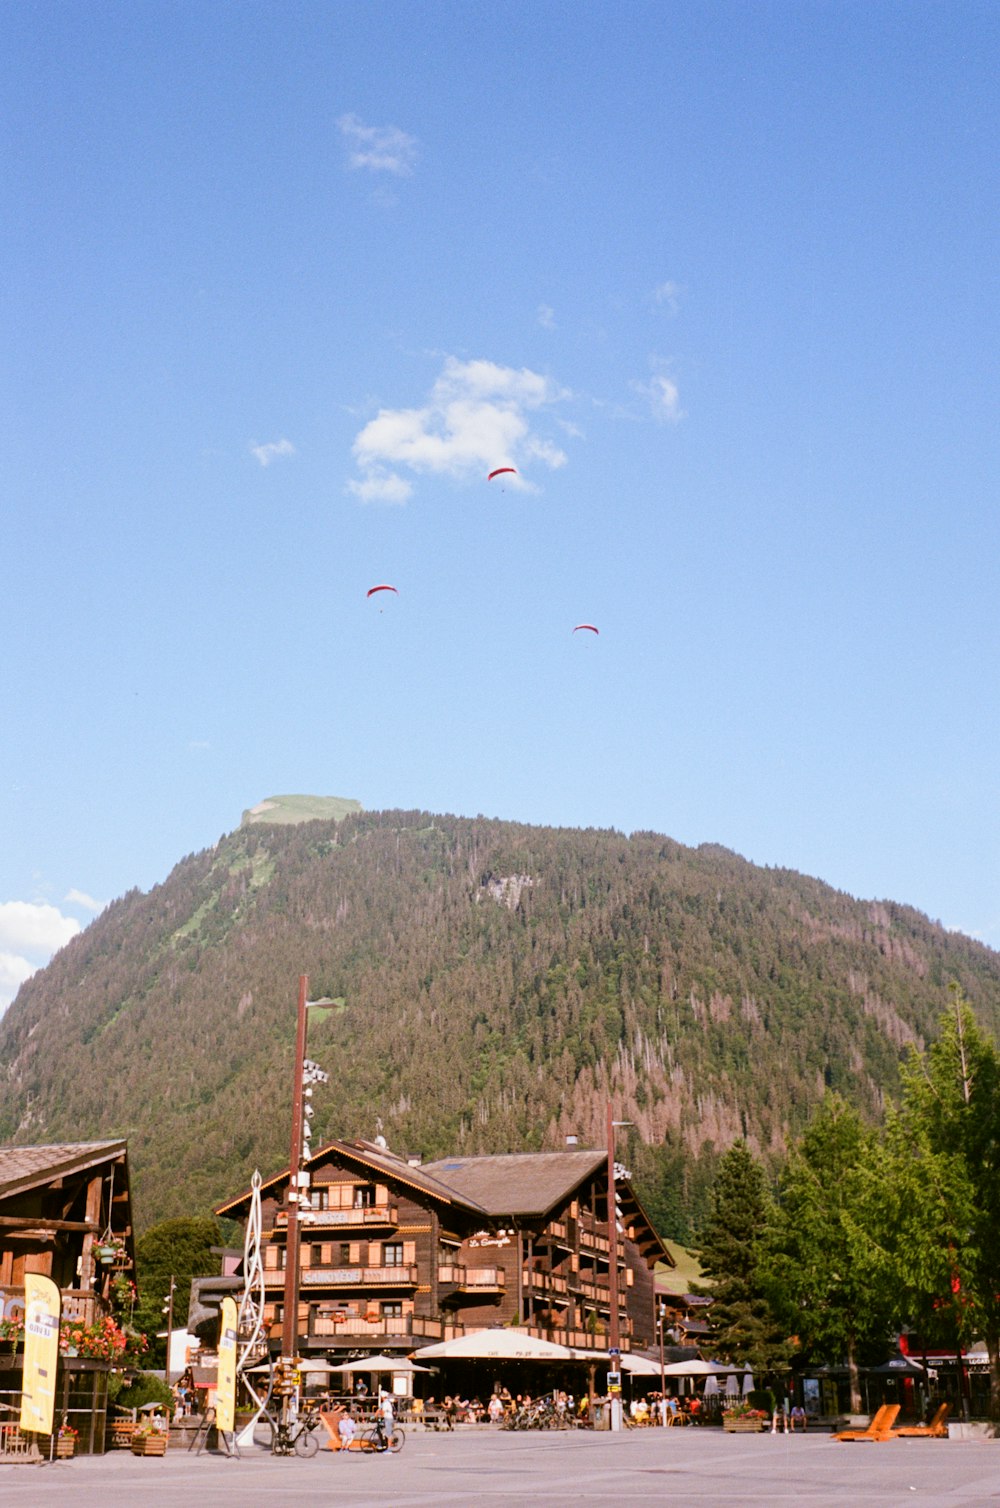 a group of people flying kites in front of a mountain